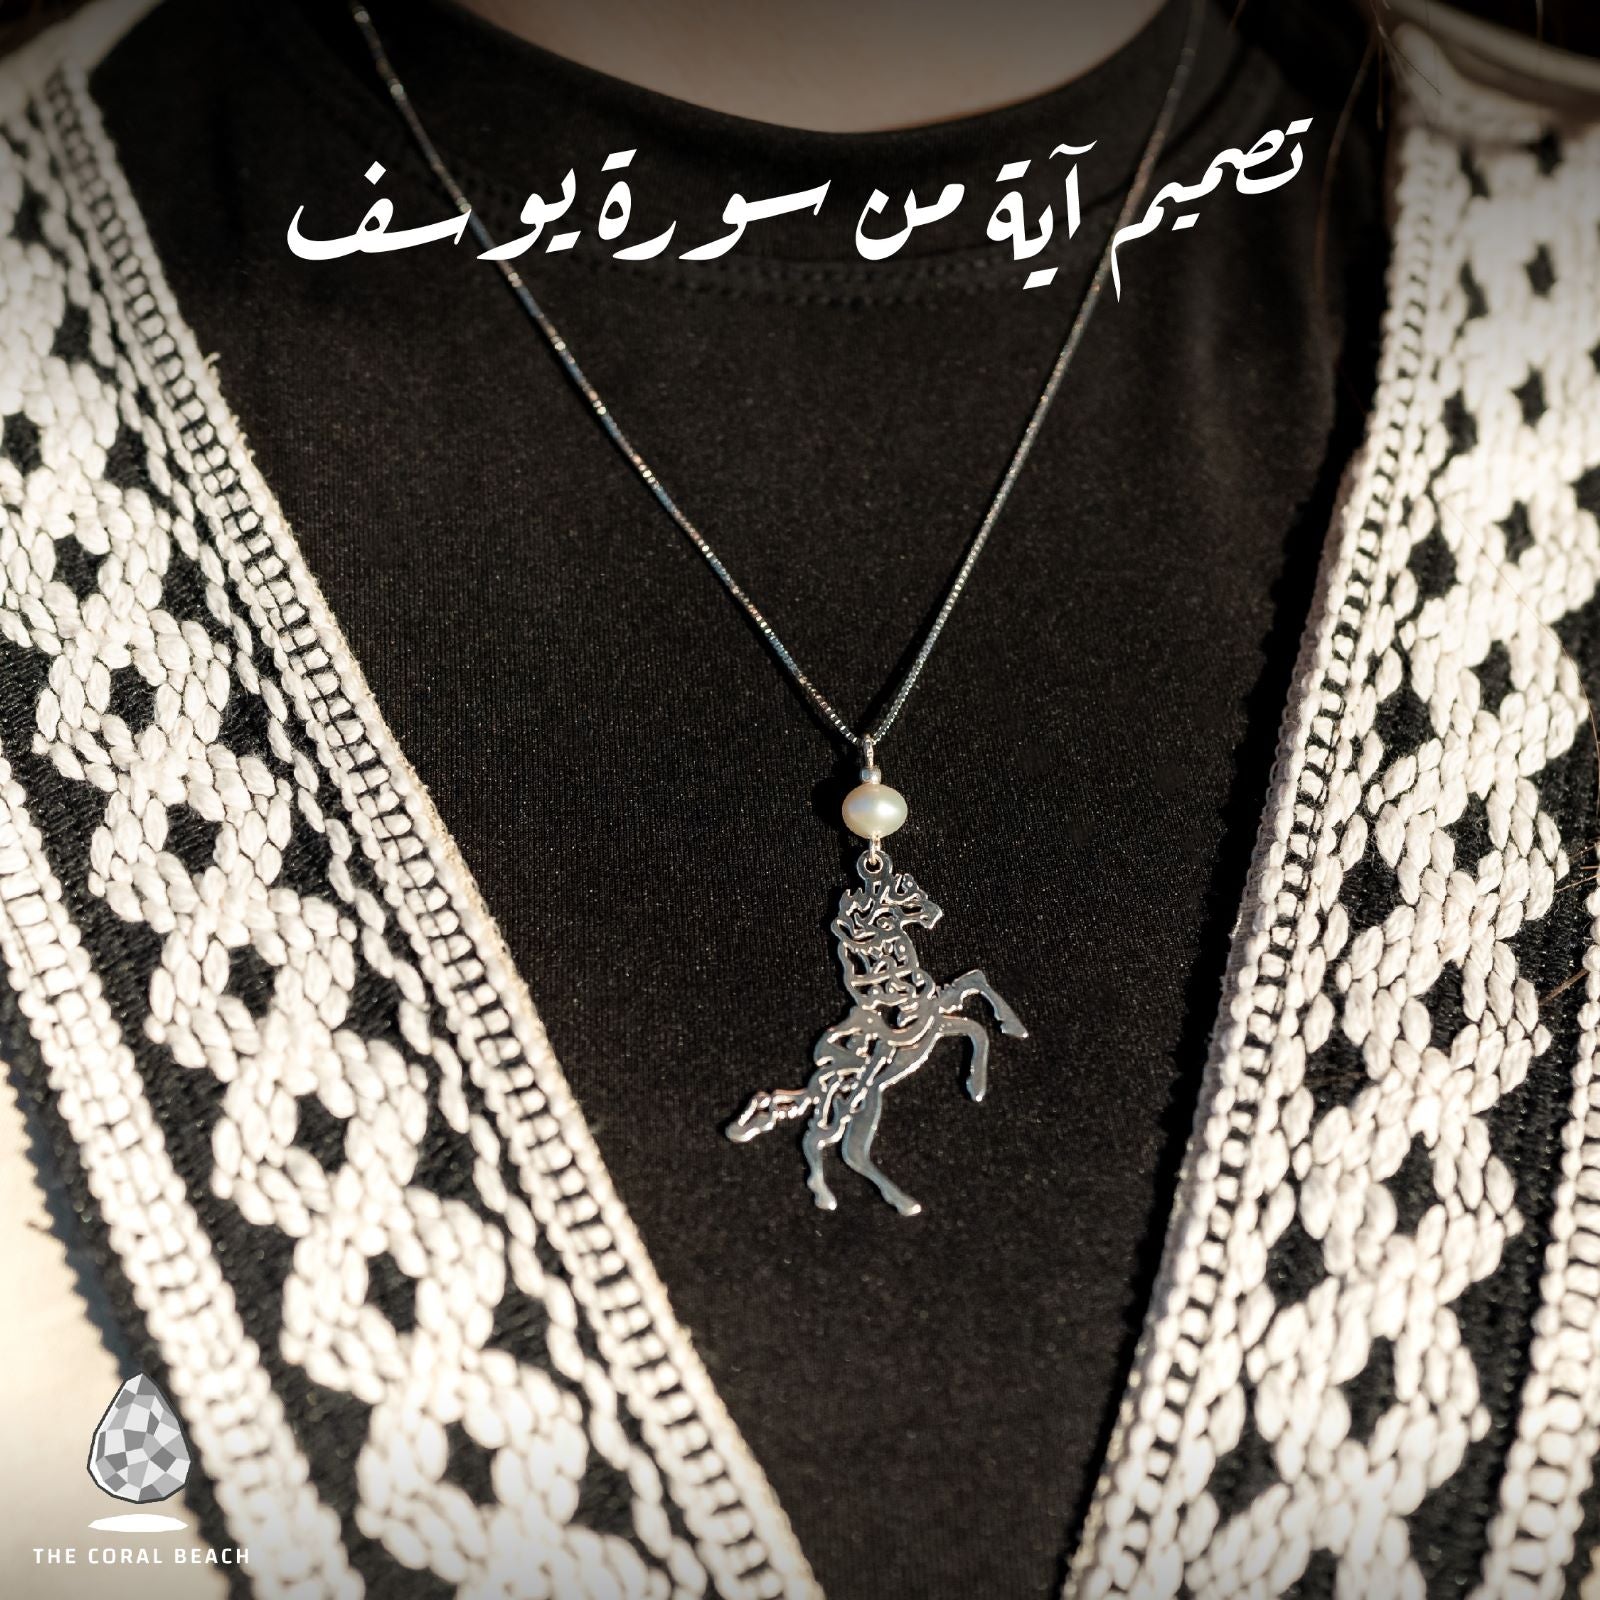 Horse car mirror / Necklace with a verse from "سورة يوسف" with turquoise stone